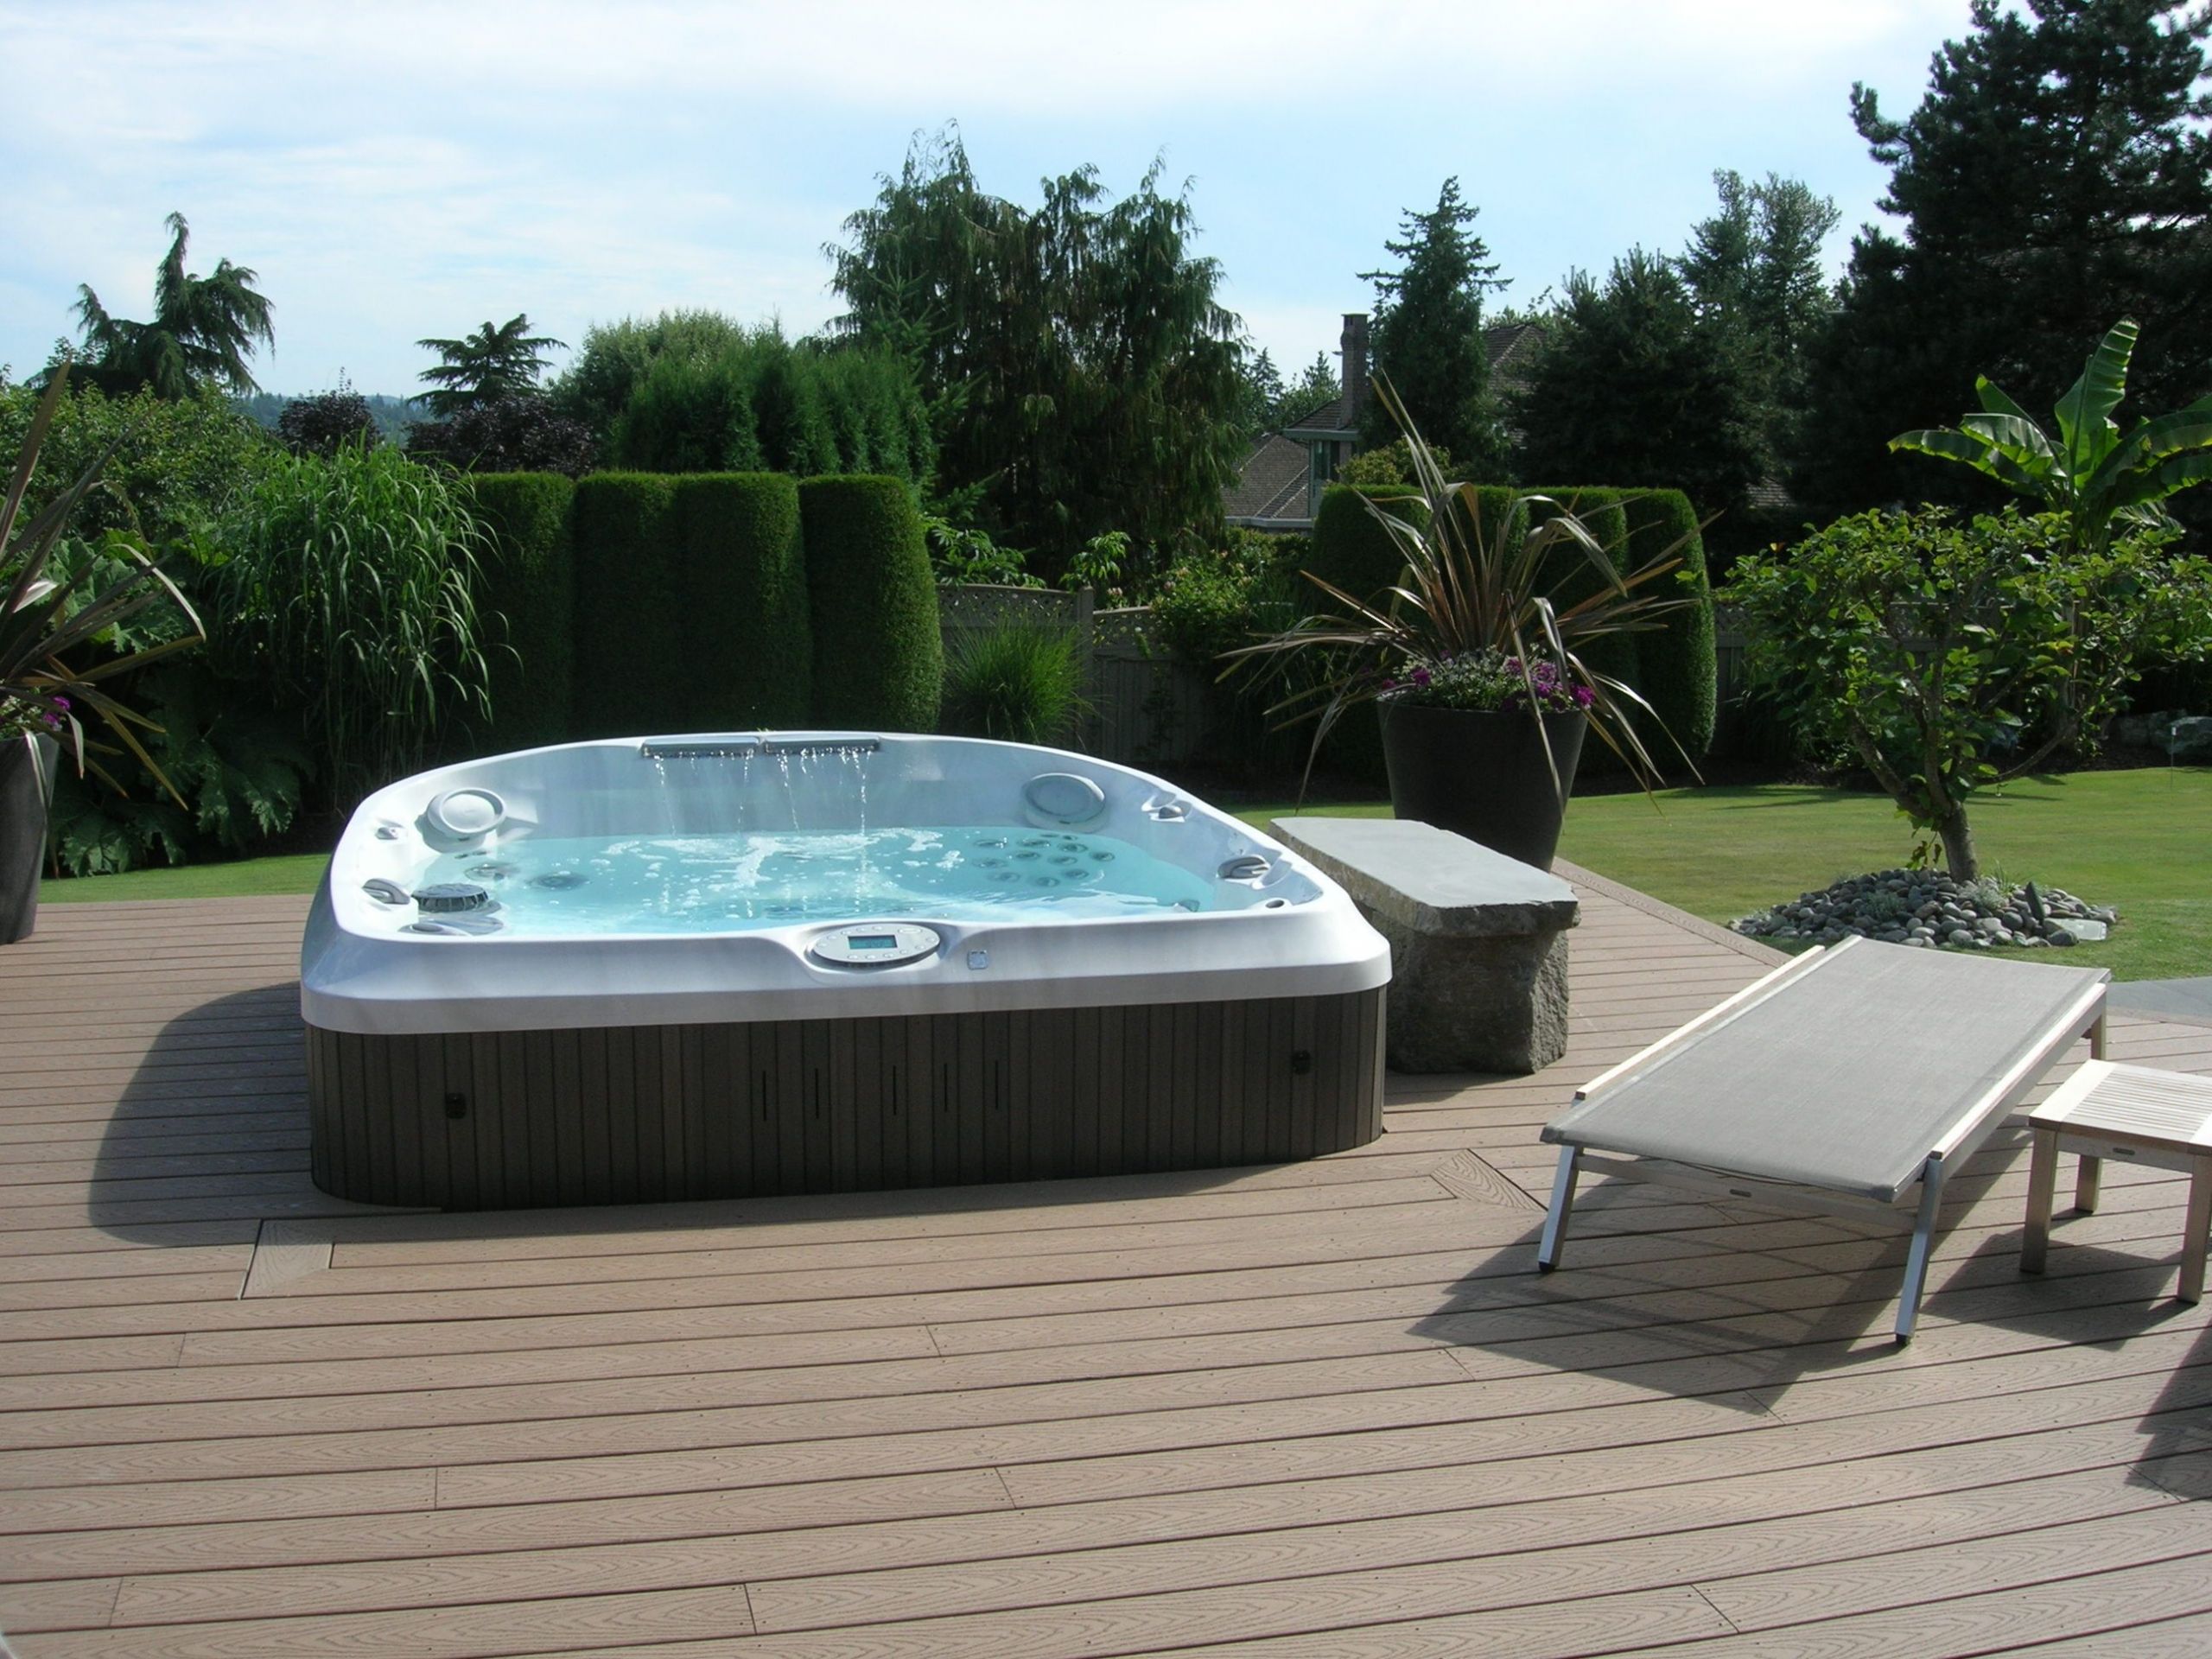 Whirlpool Im Garten Schön A Jacuzzi Hot Tub Can Add the Finishing touches to A